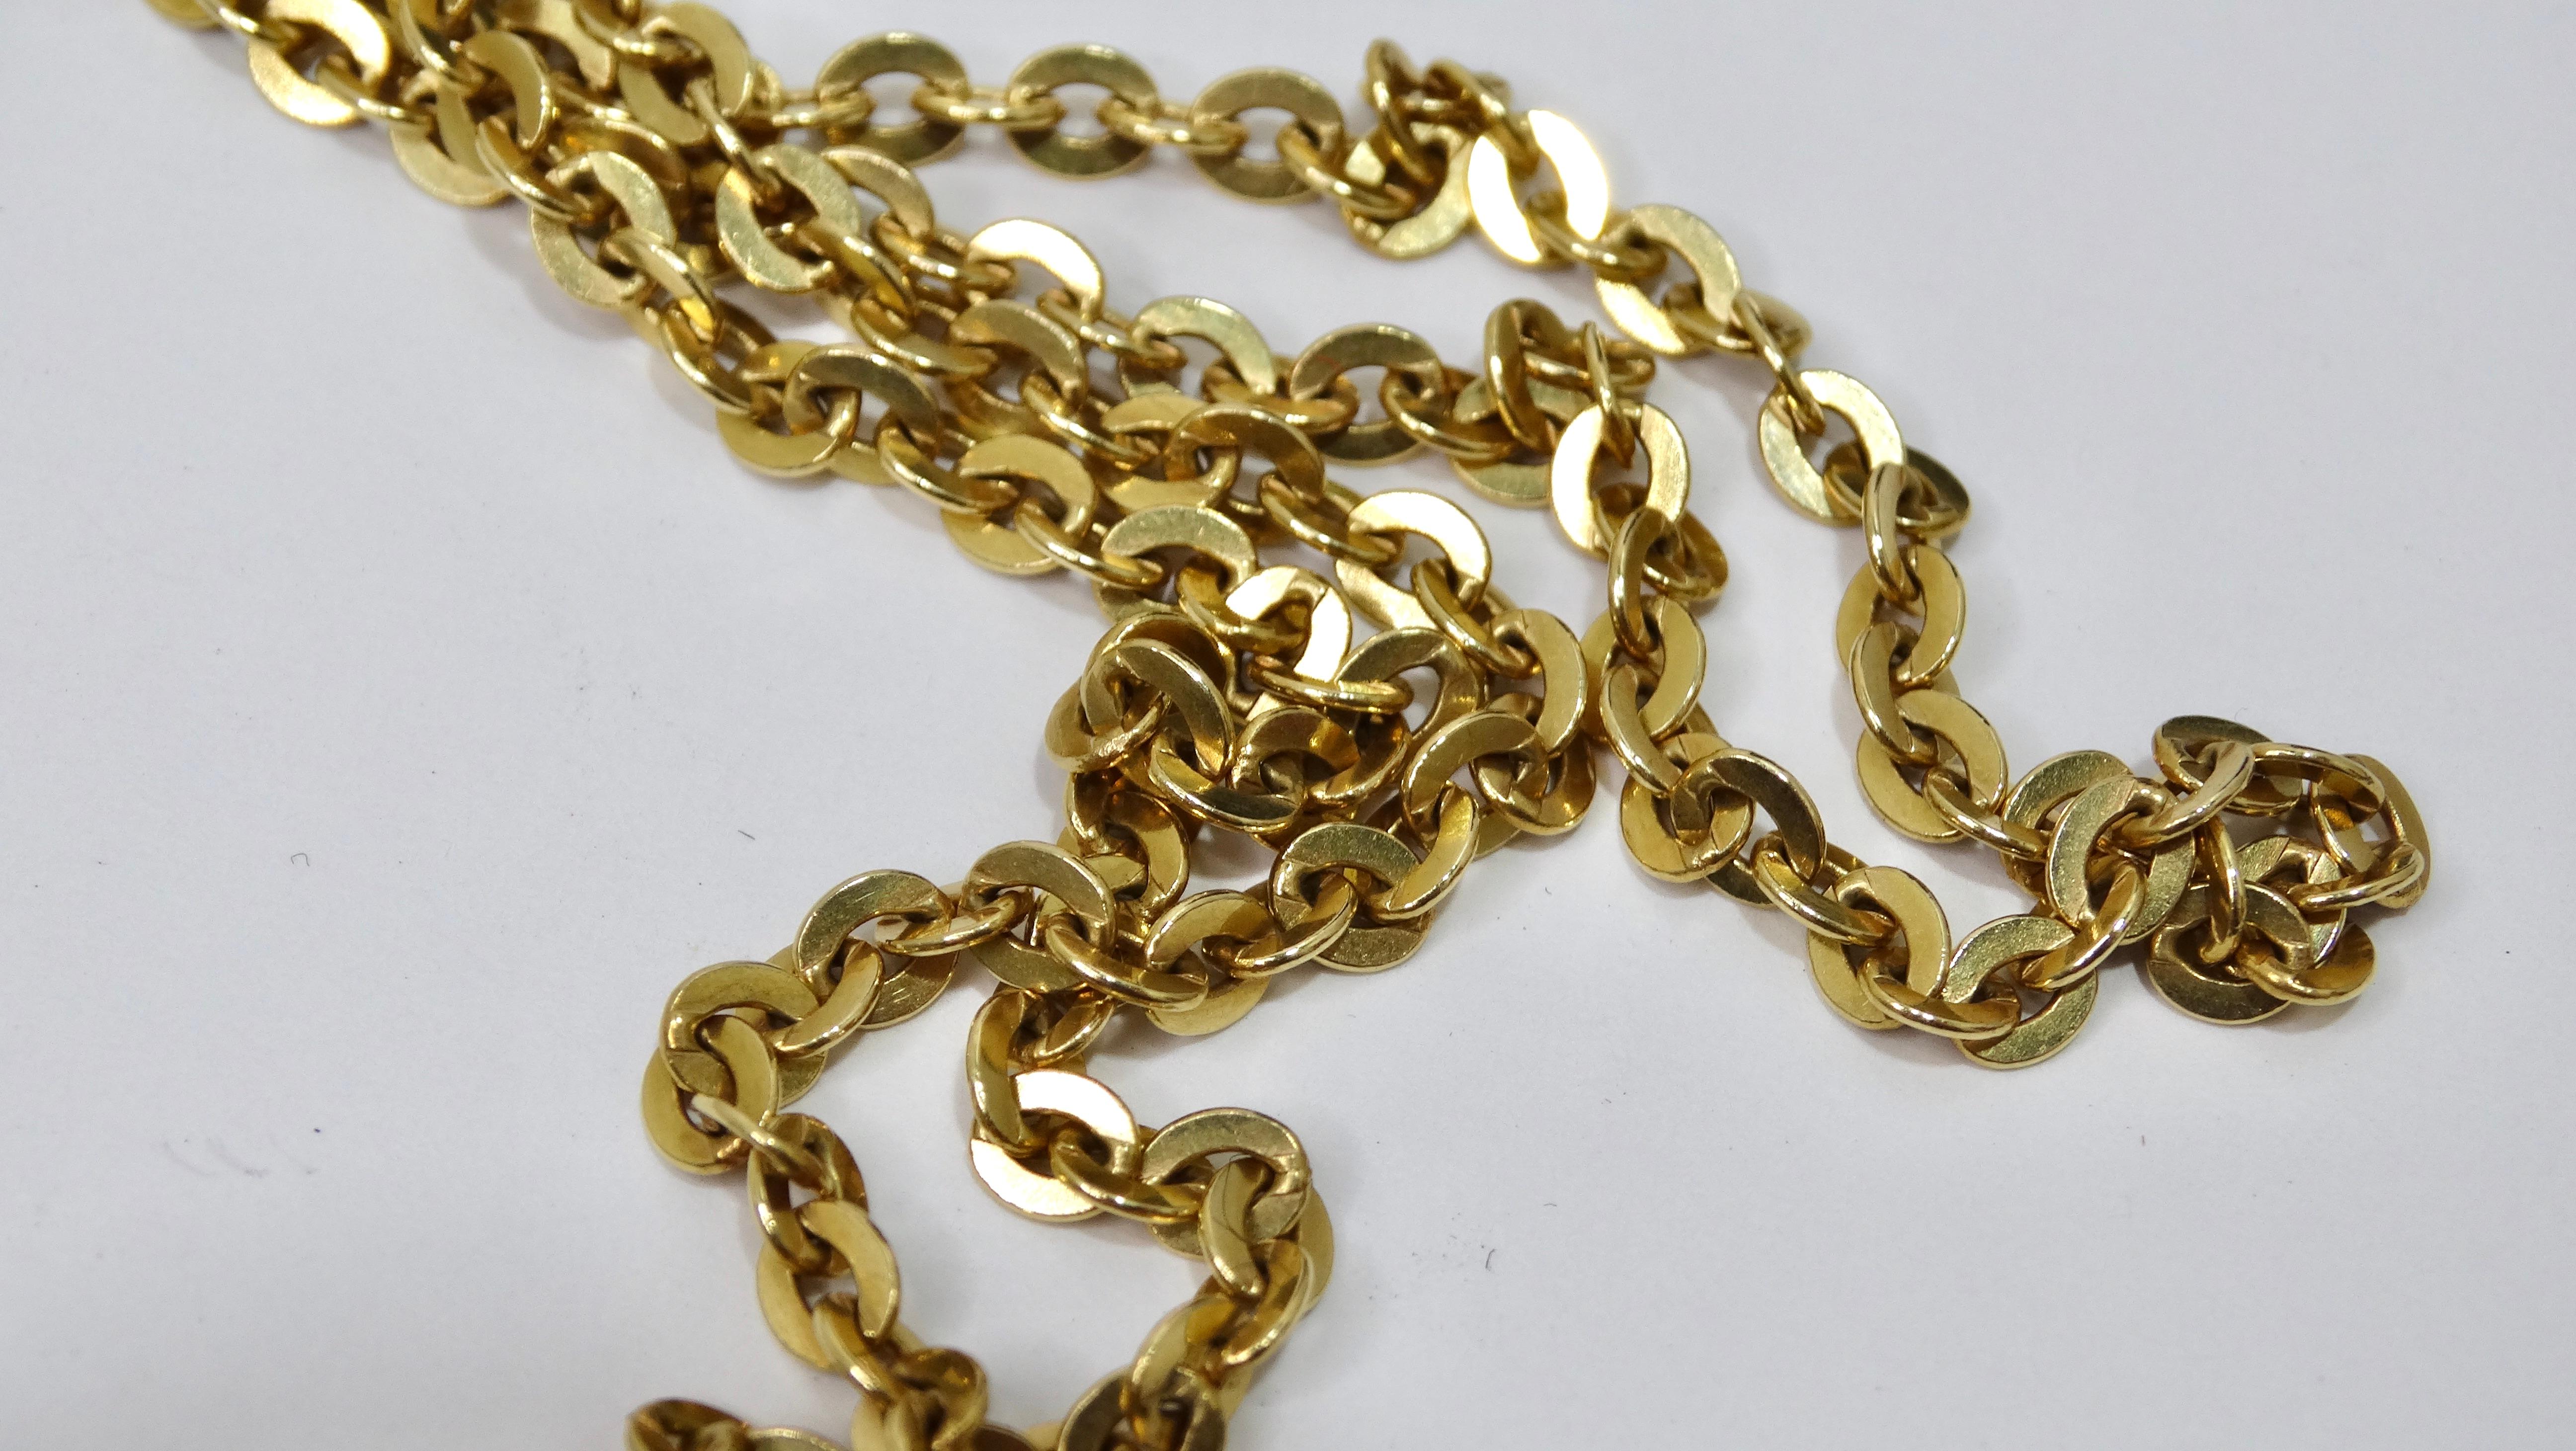 Add this classic to your jewelry collection! There's no going wrong with a basic gold chain that will last you a lifetime. Pair with a pendant or layer with other necklaces to create a dramatic look. It features a 14 inch length, a beautiful